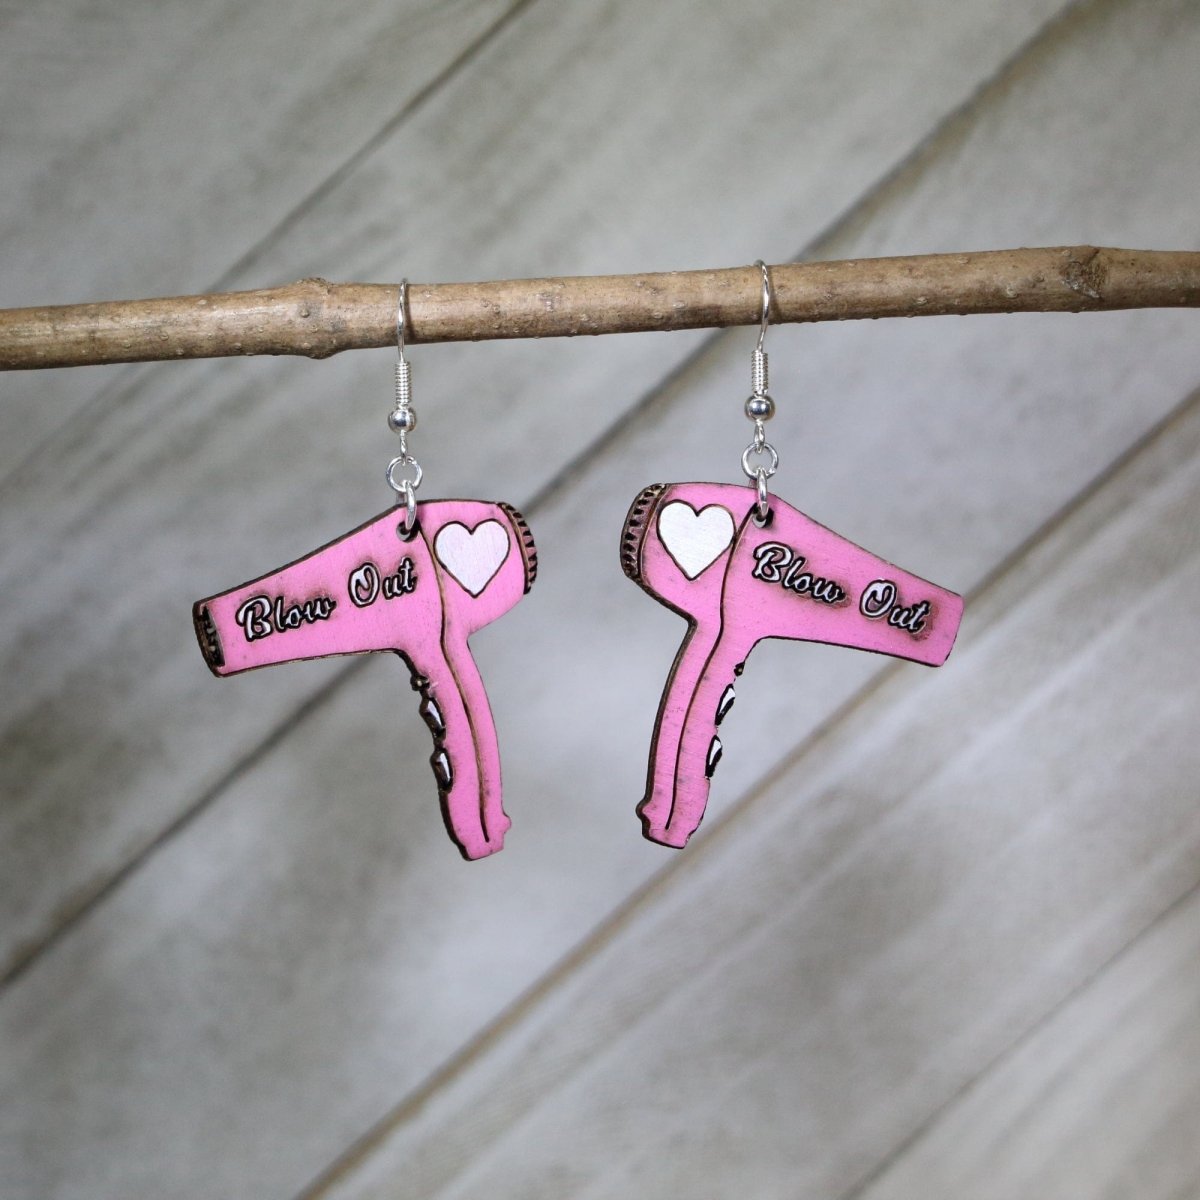 Hair Blow Dryer Wooden Dangle Earrings - - Cate's Concepts, LLC